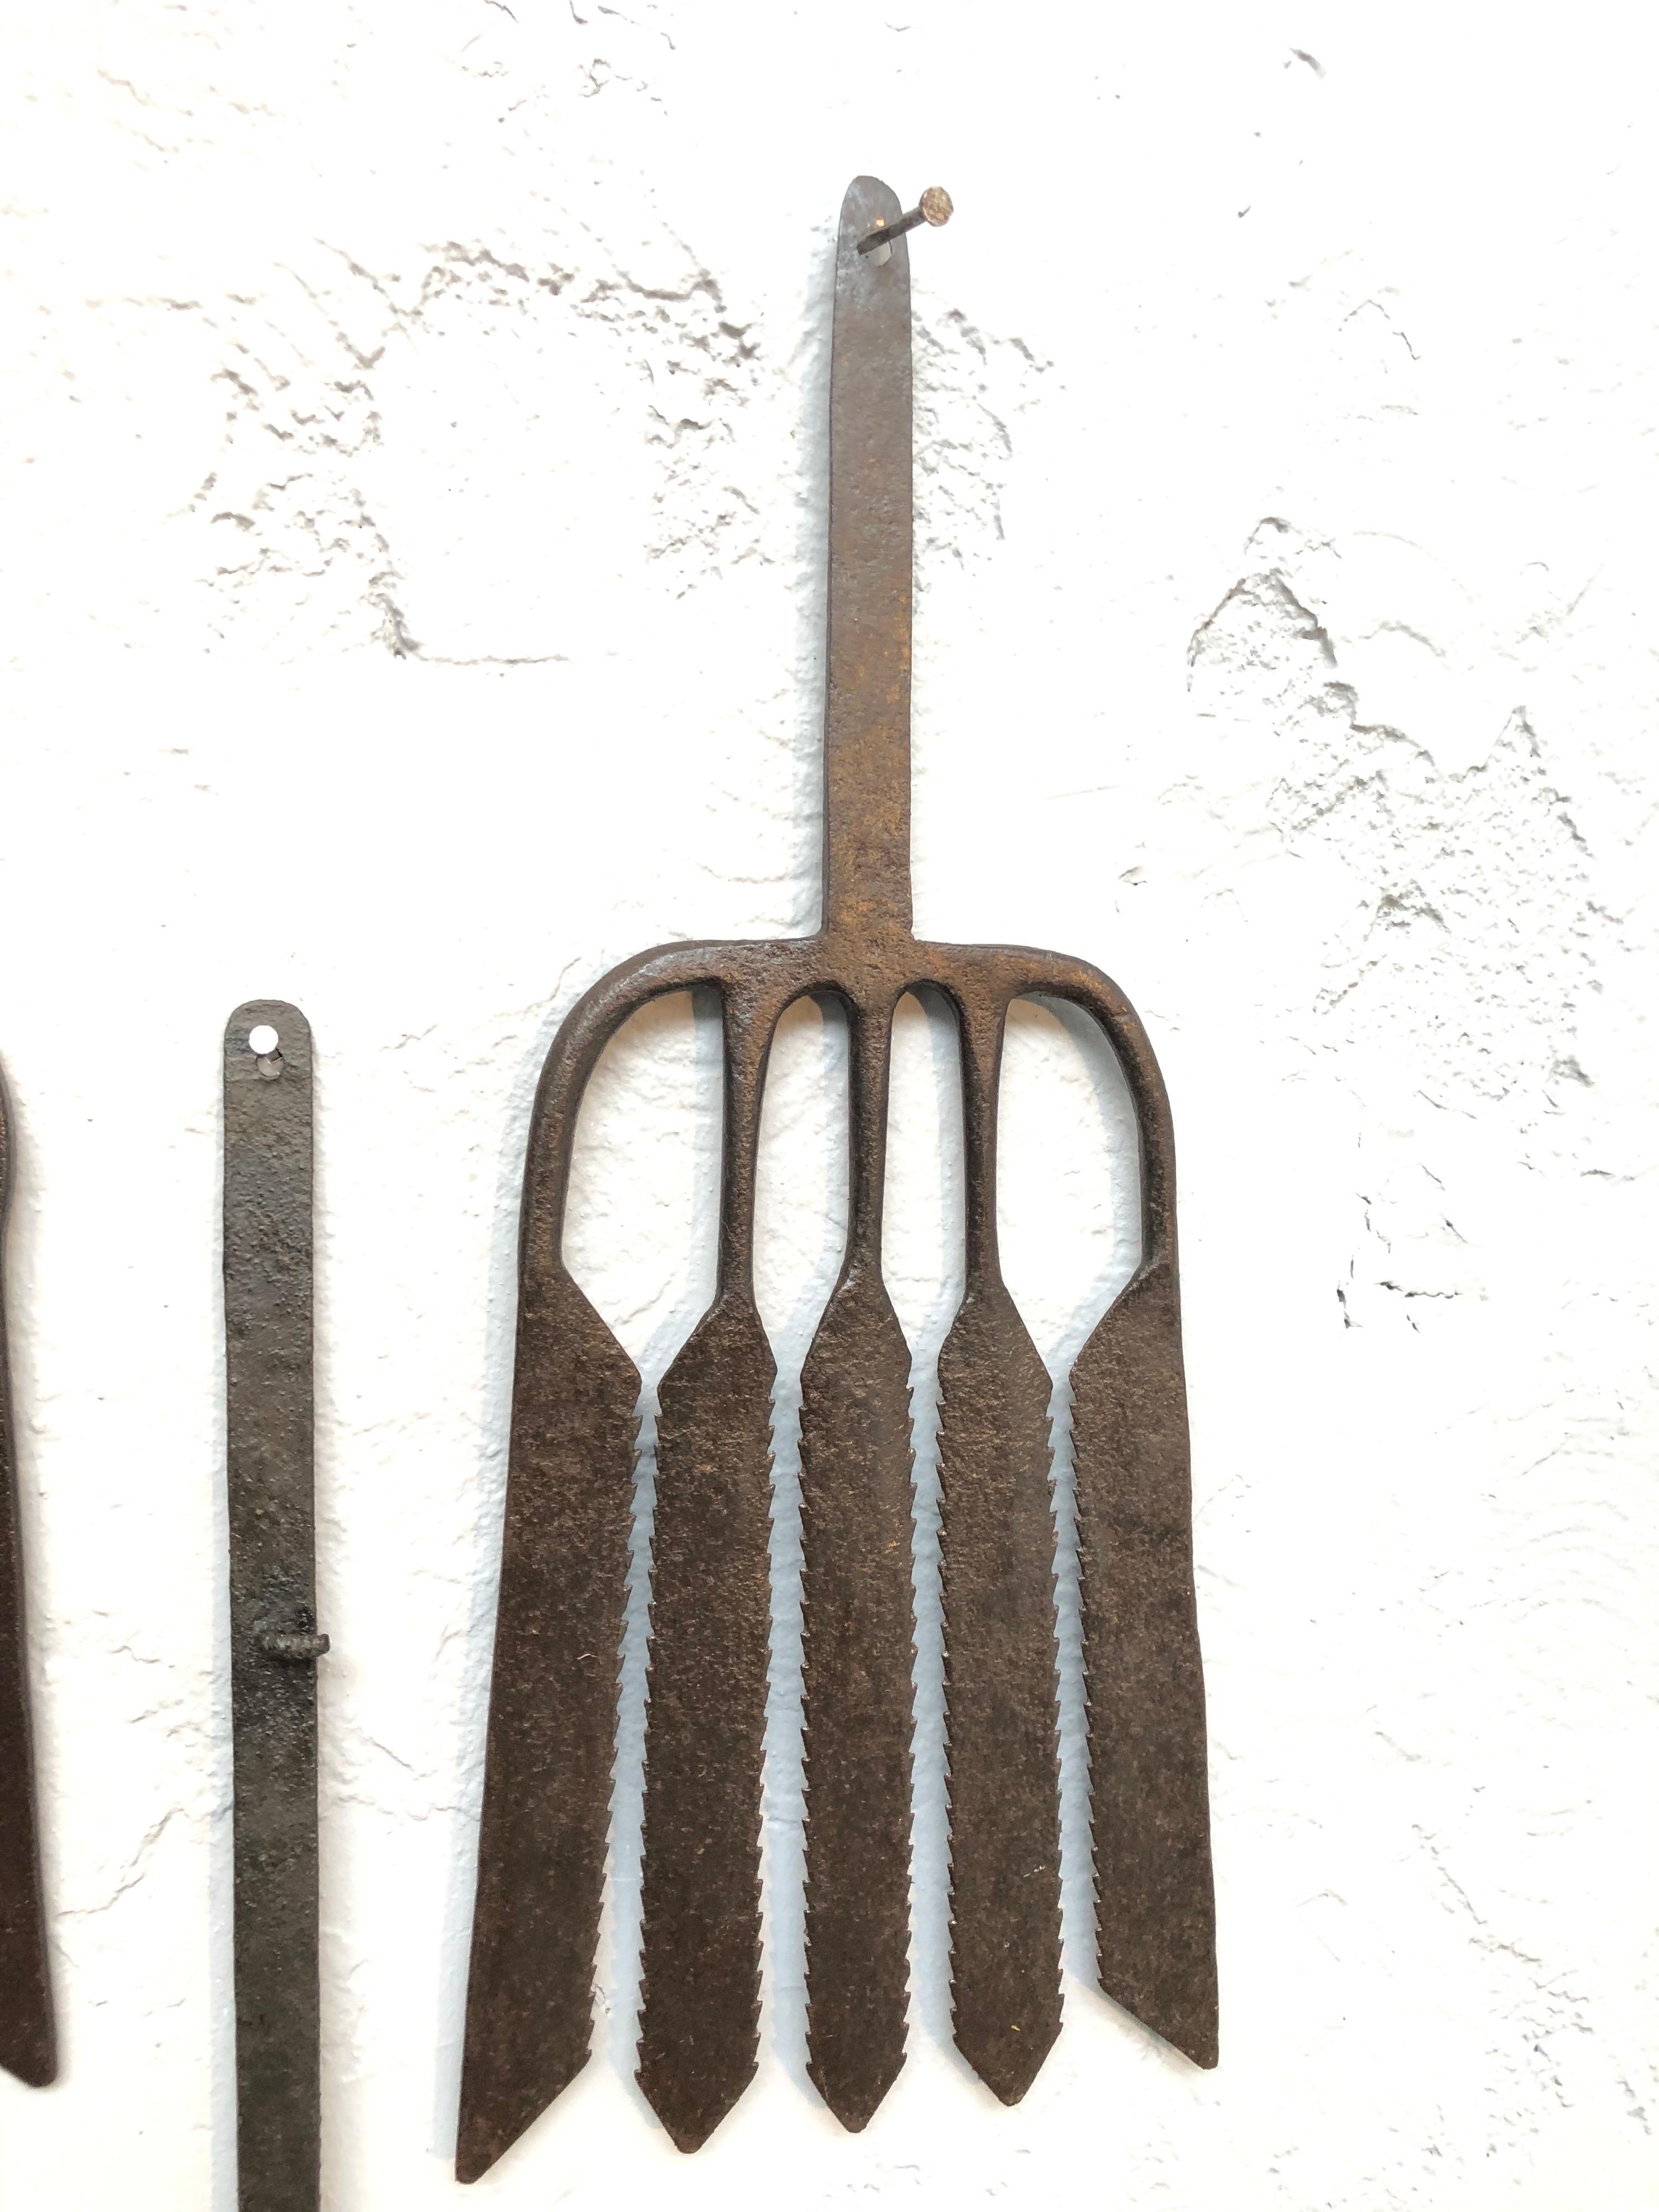 Collection of Antique Wrought Iron Eel Forks 2